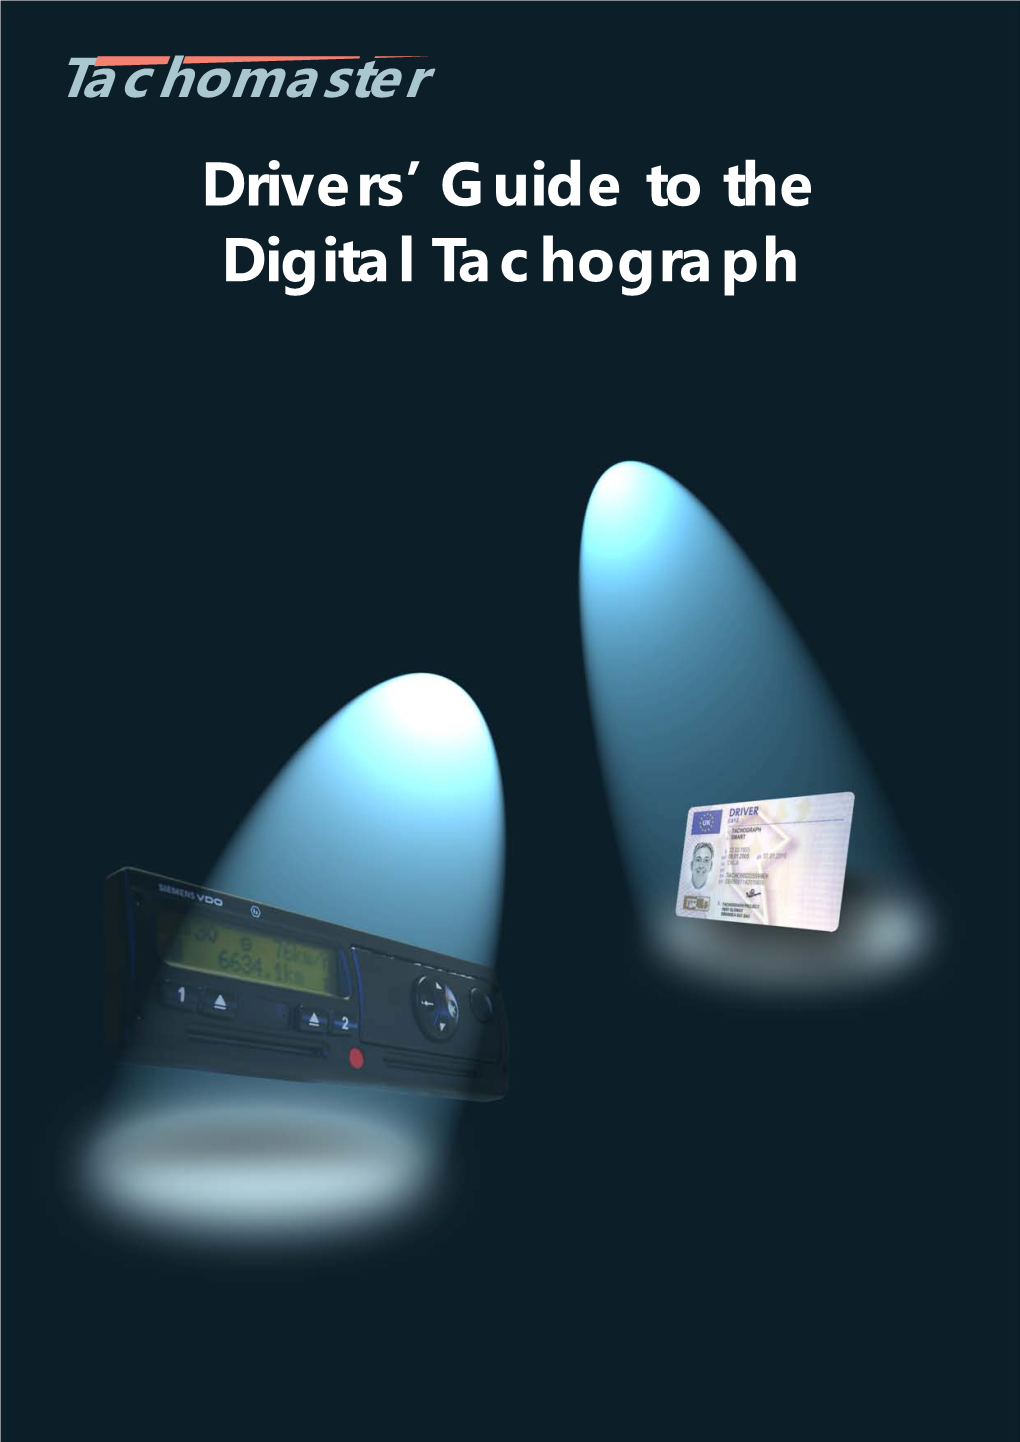 The Tachomaster Drivers' Guide to the Digital Tachograph